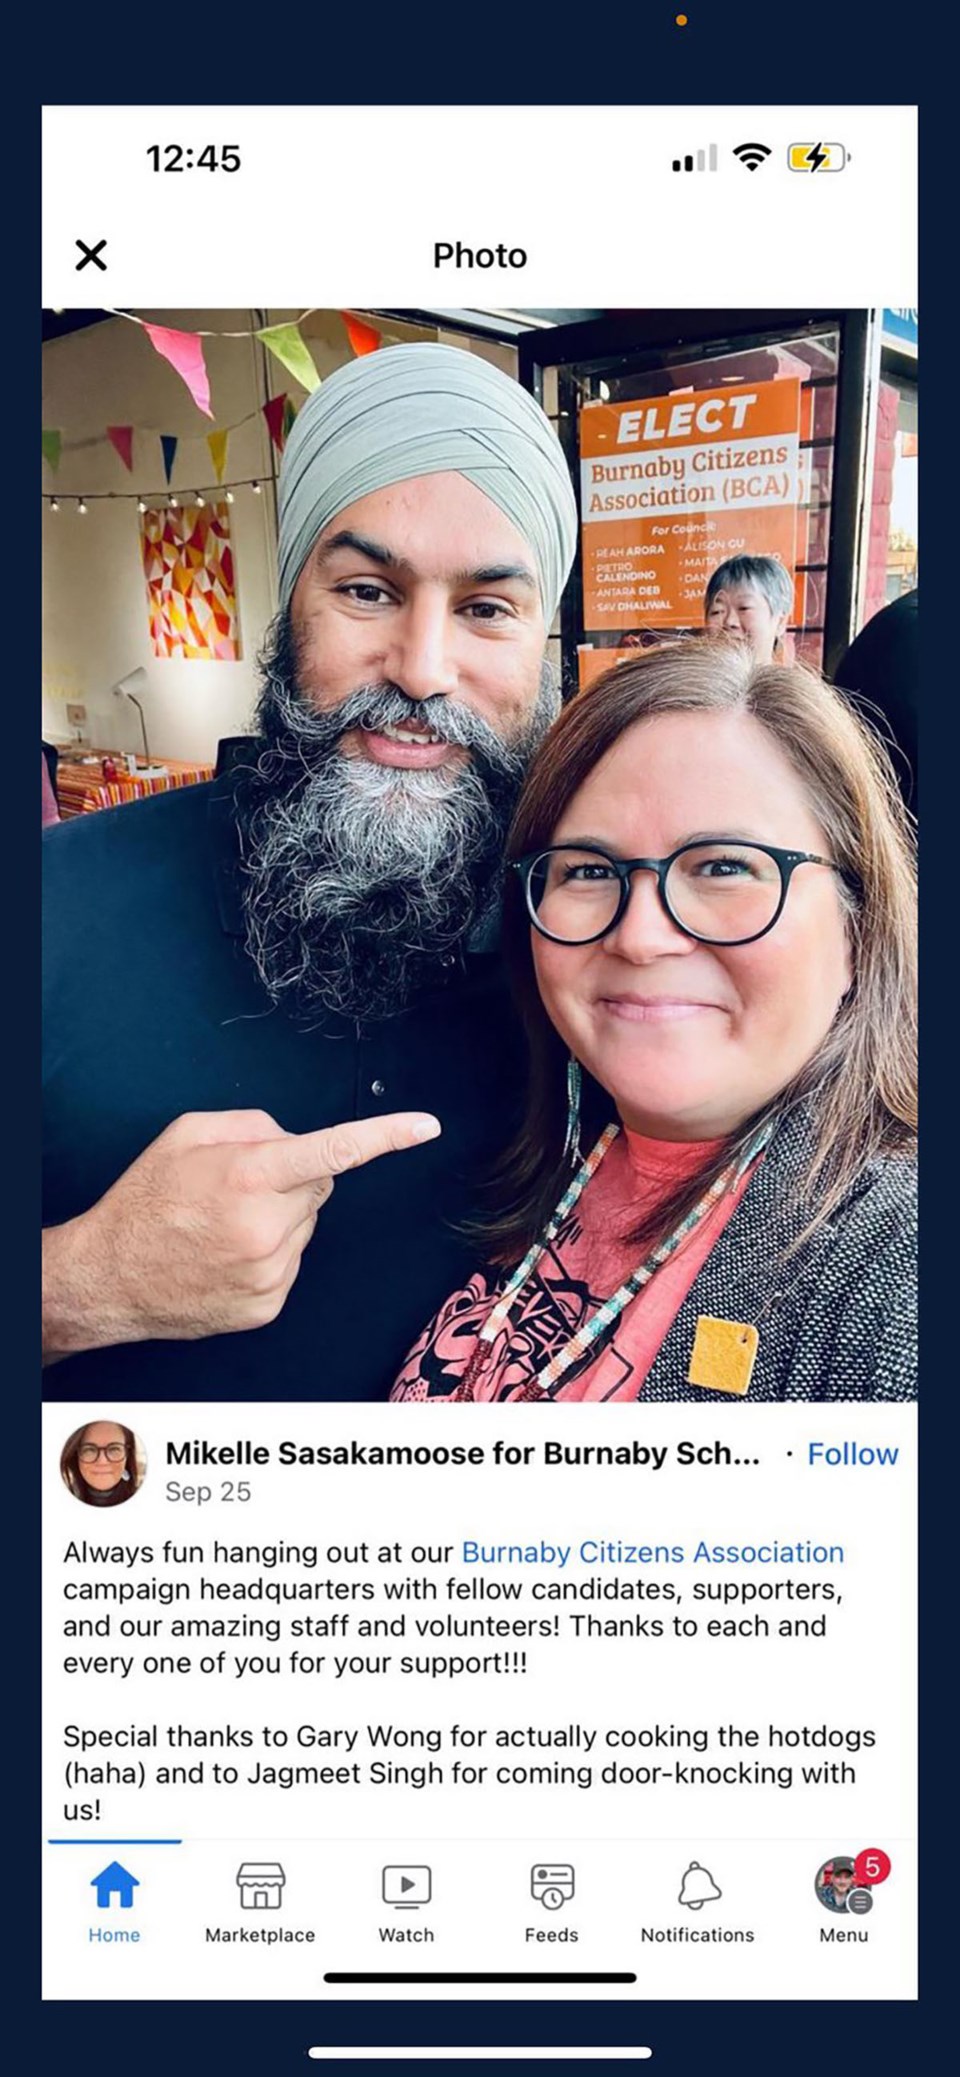 A photo of Mikelle Sasakamoose with NDP Leader Jagmeet Singh posted on Sept. 25.